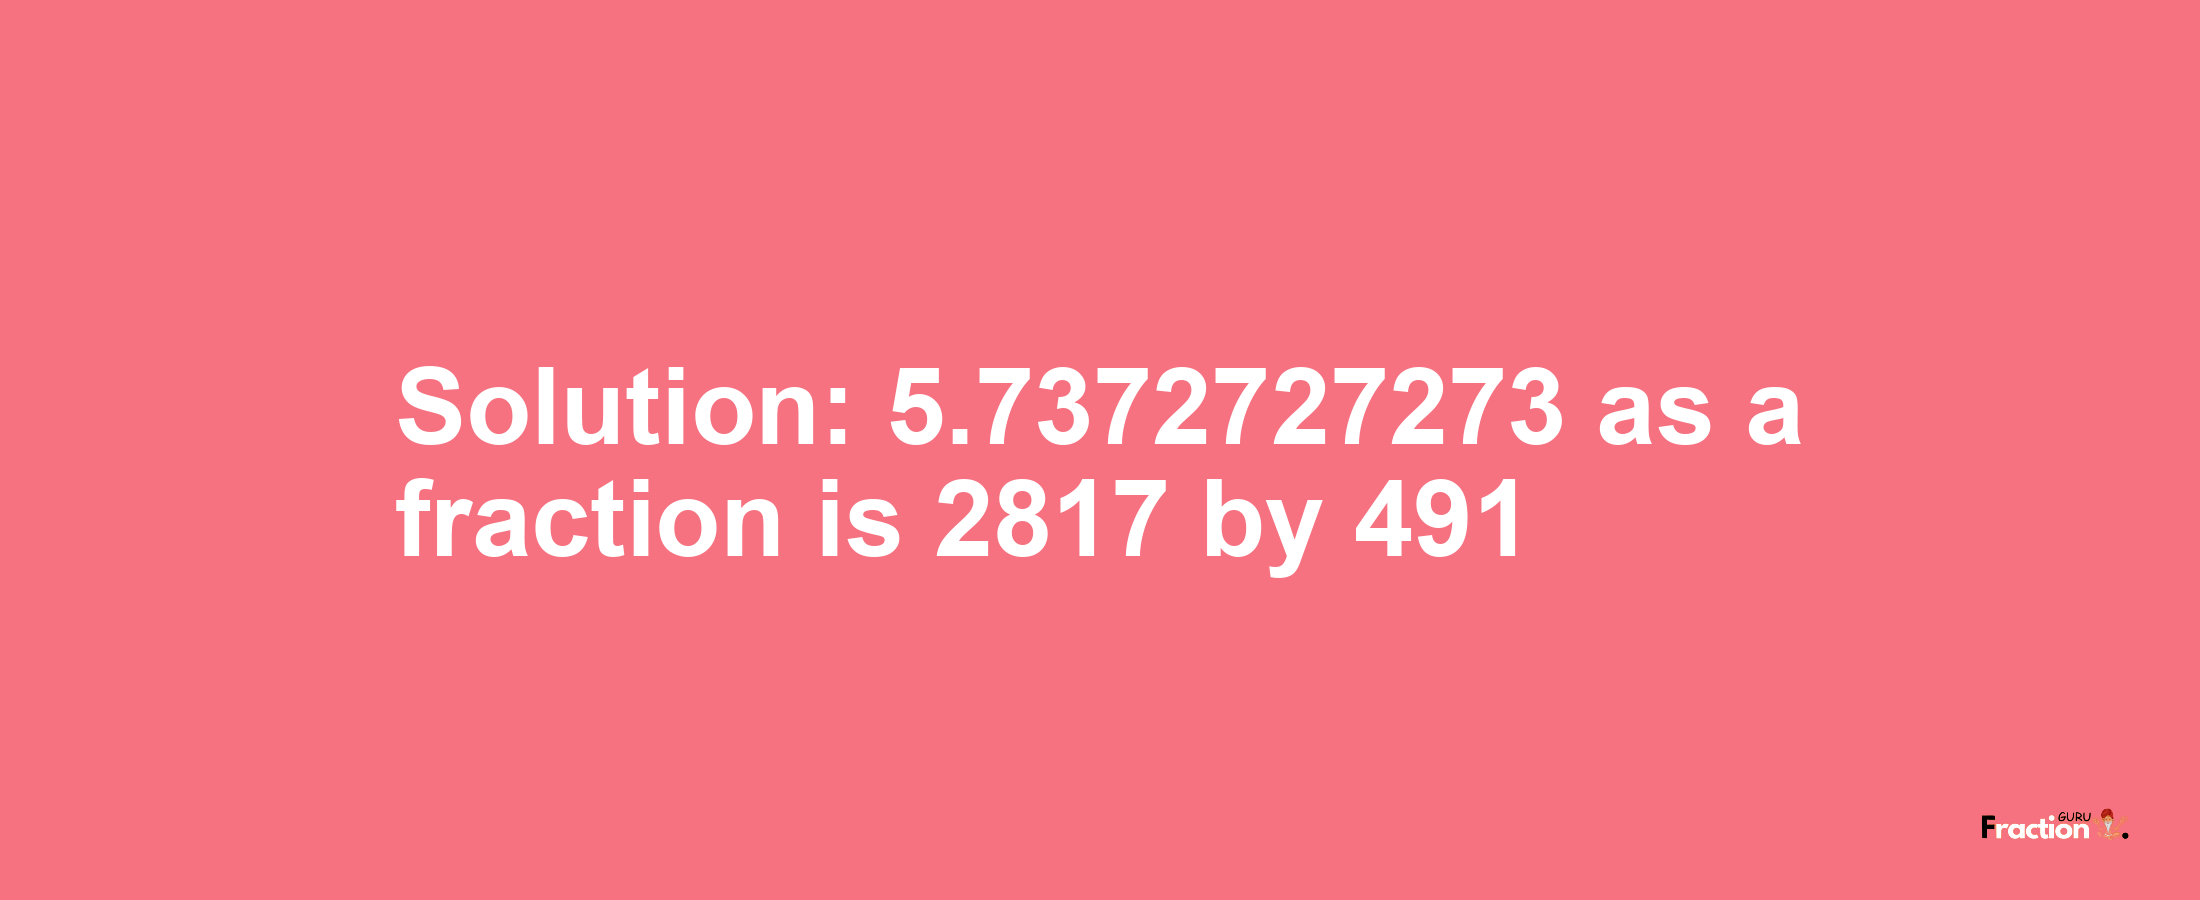 Solution:5.7372727273 as a fraction is 2817/491